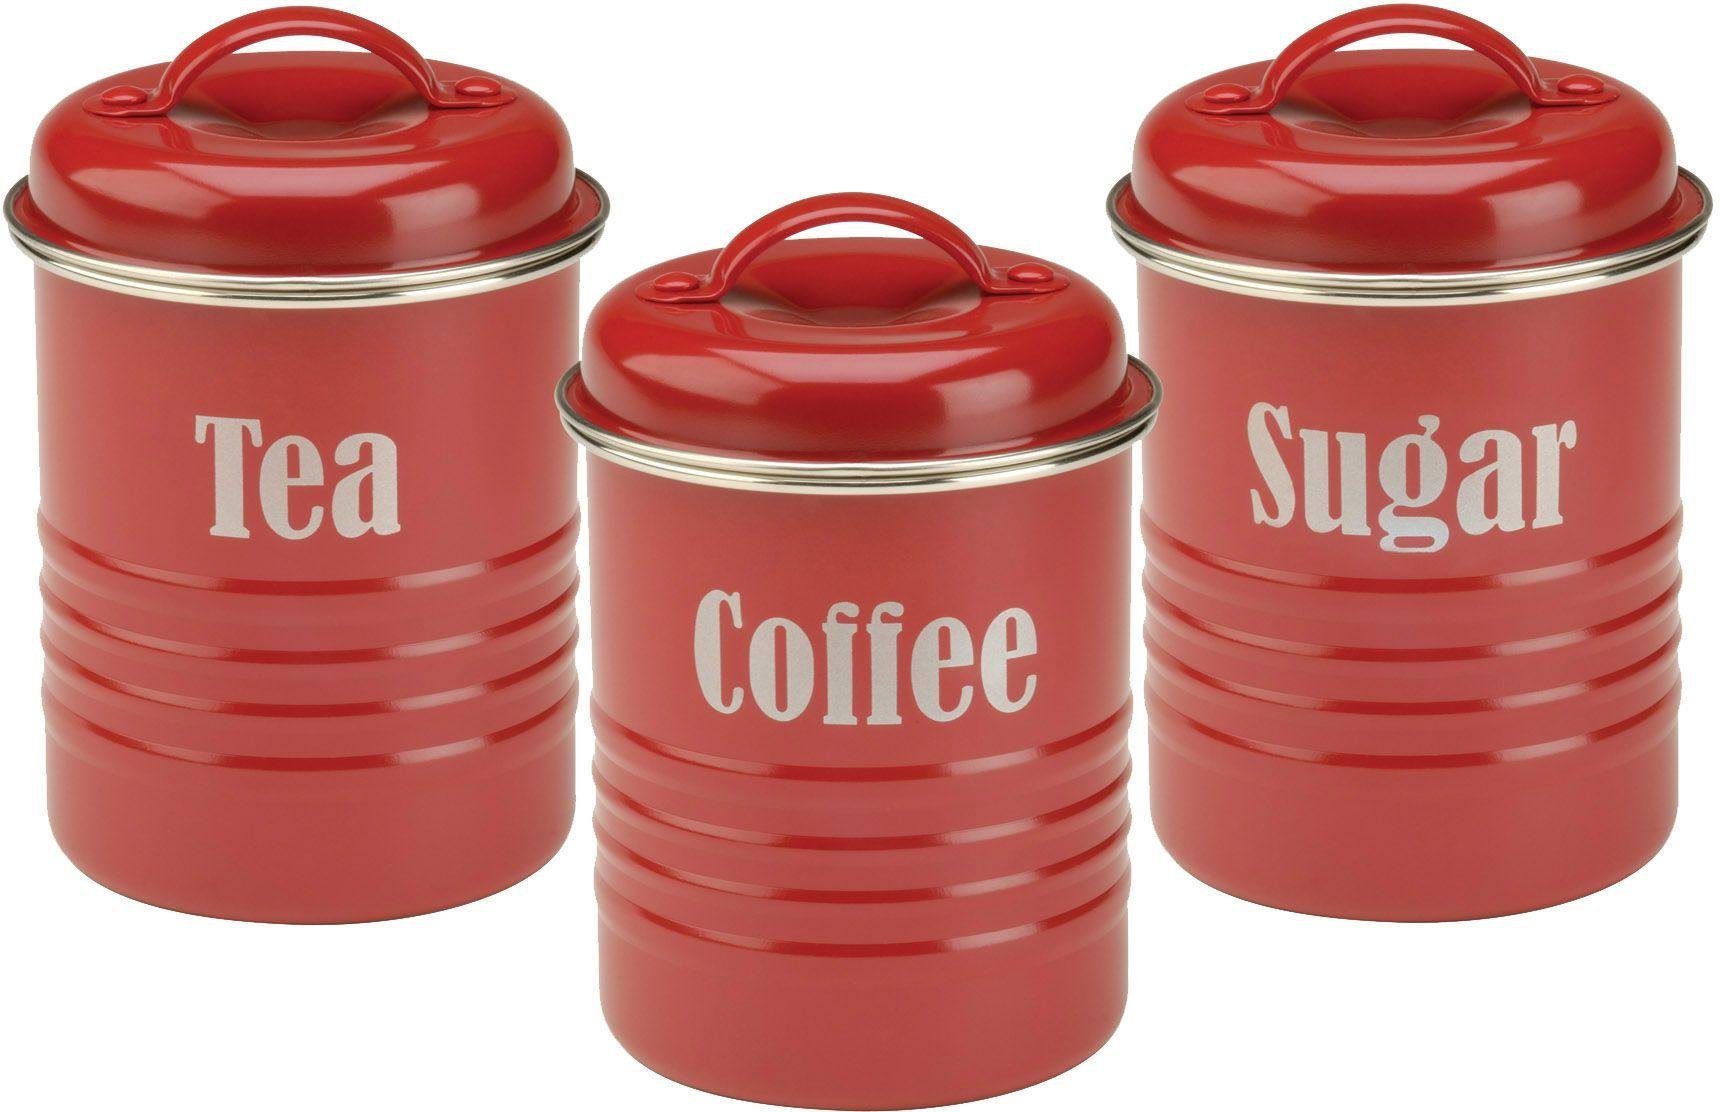 Typhoon Vintage Kitchen Set of 3 Storage Canisters - Red